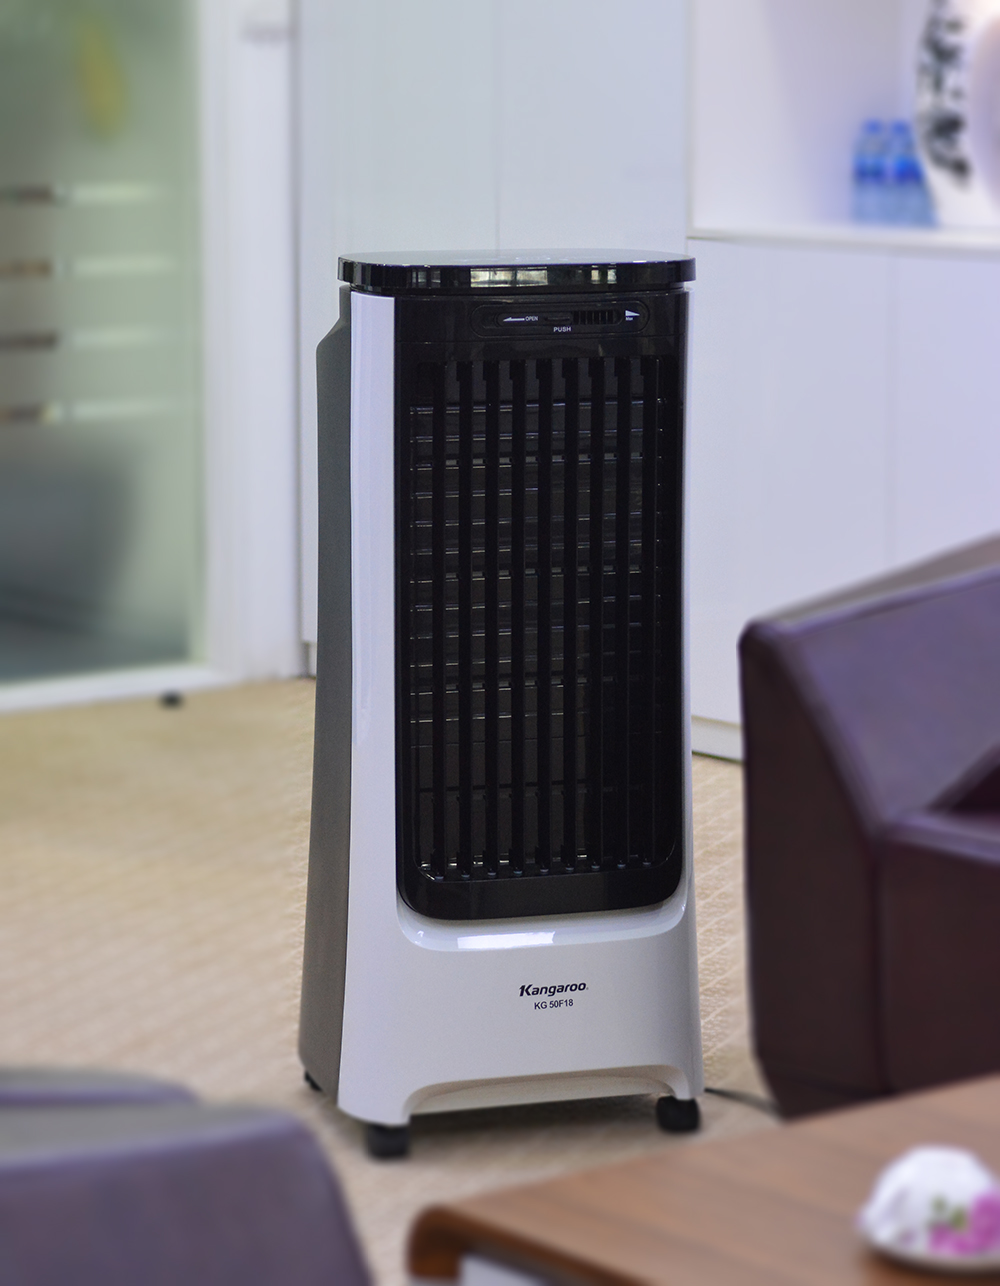 Fans are equipped with SQD engine with powerful capacity up to 130W 